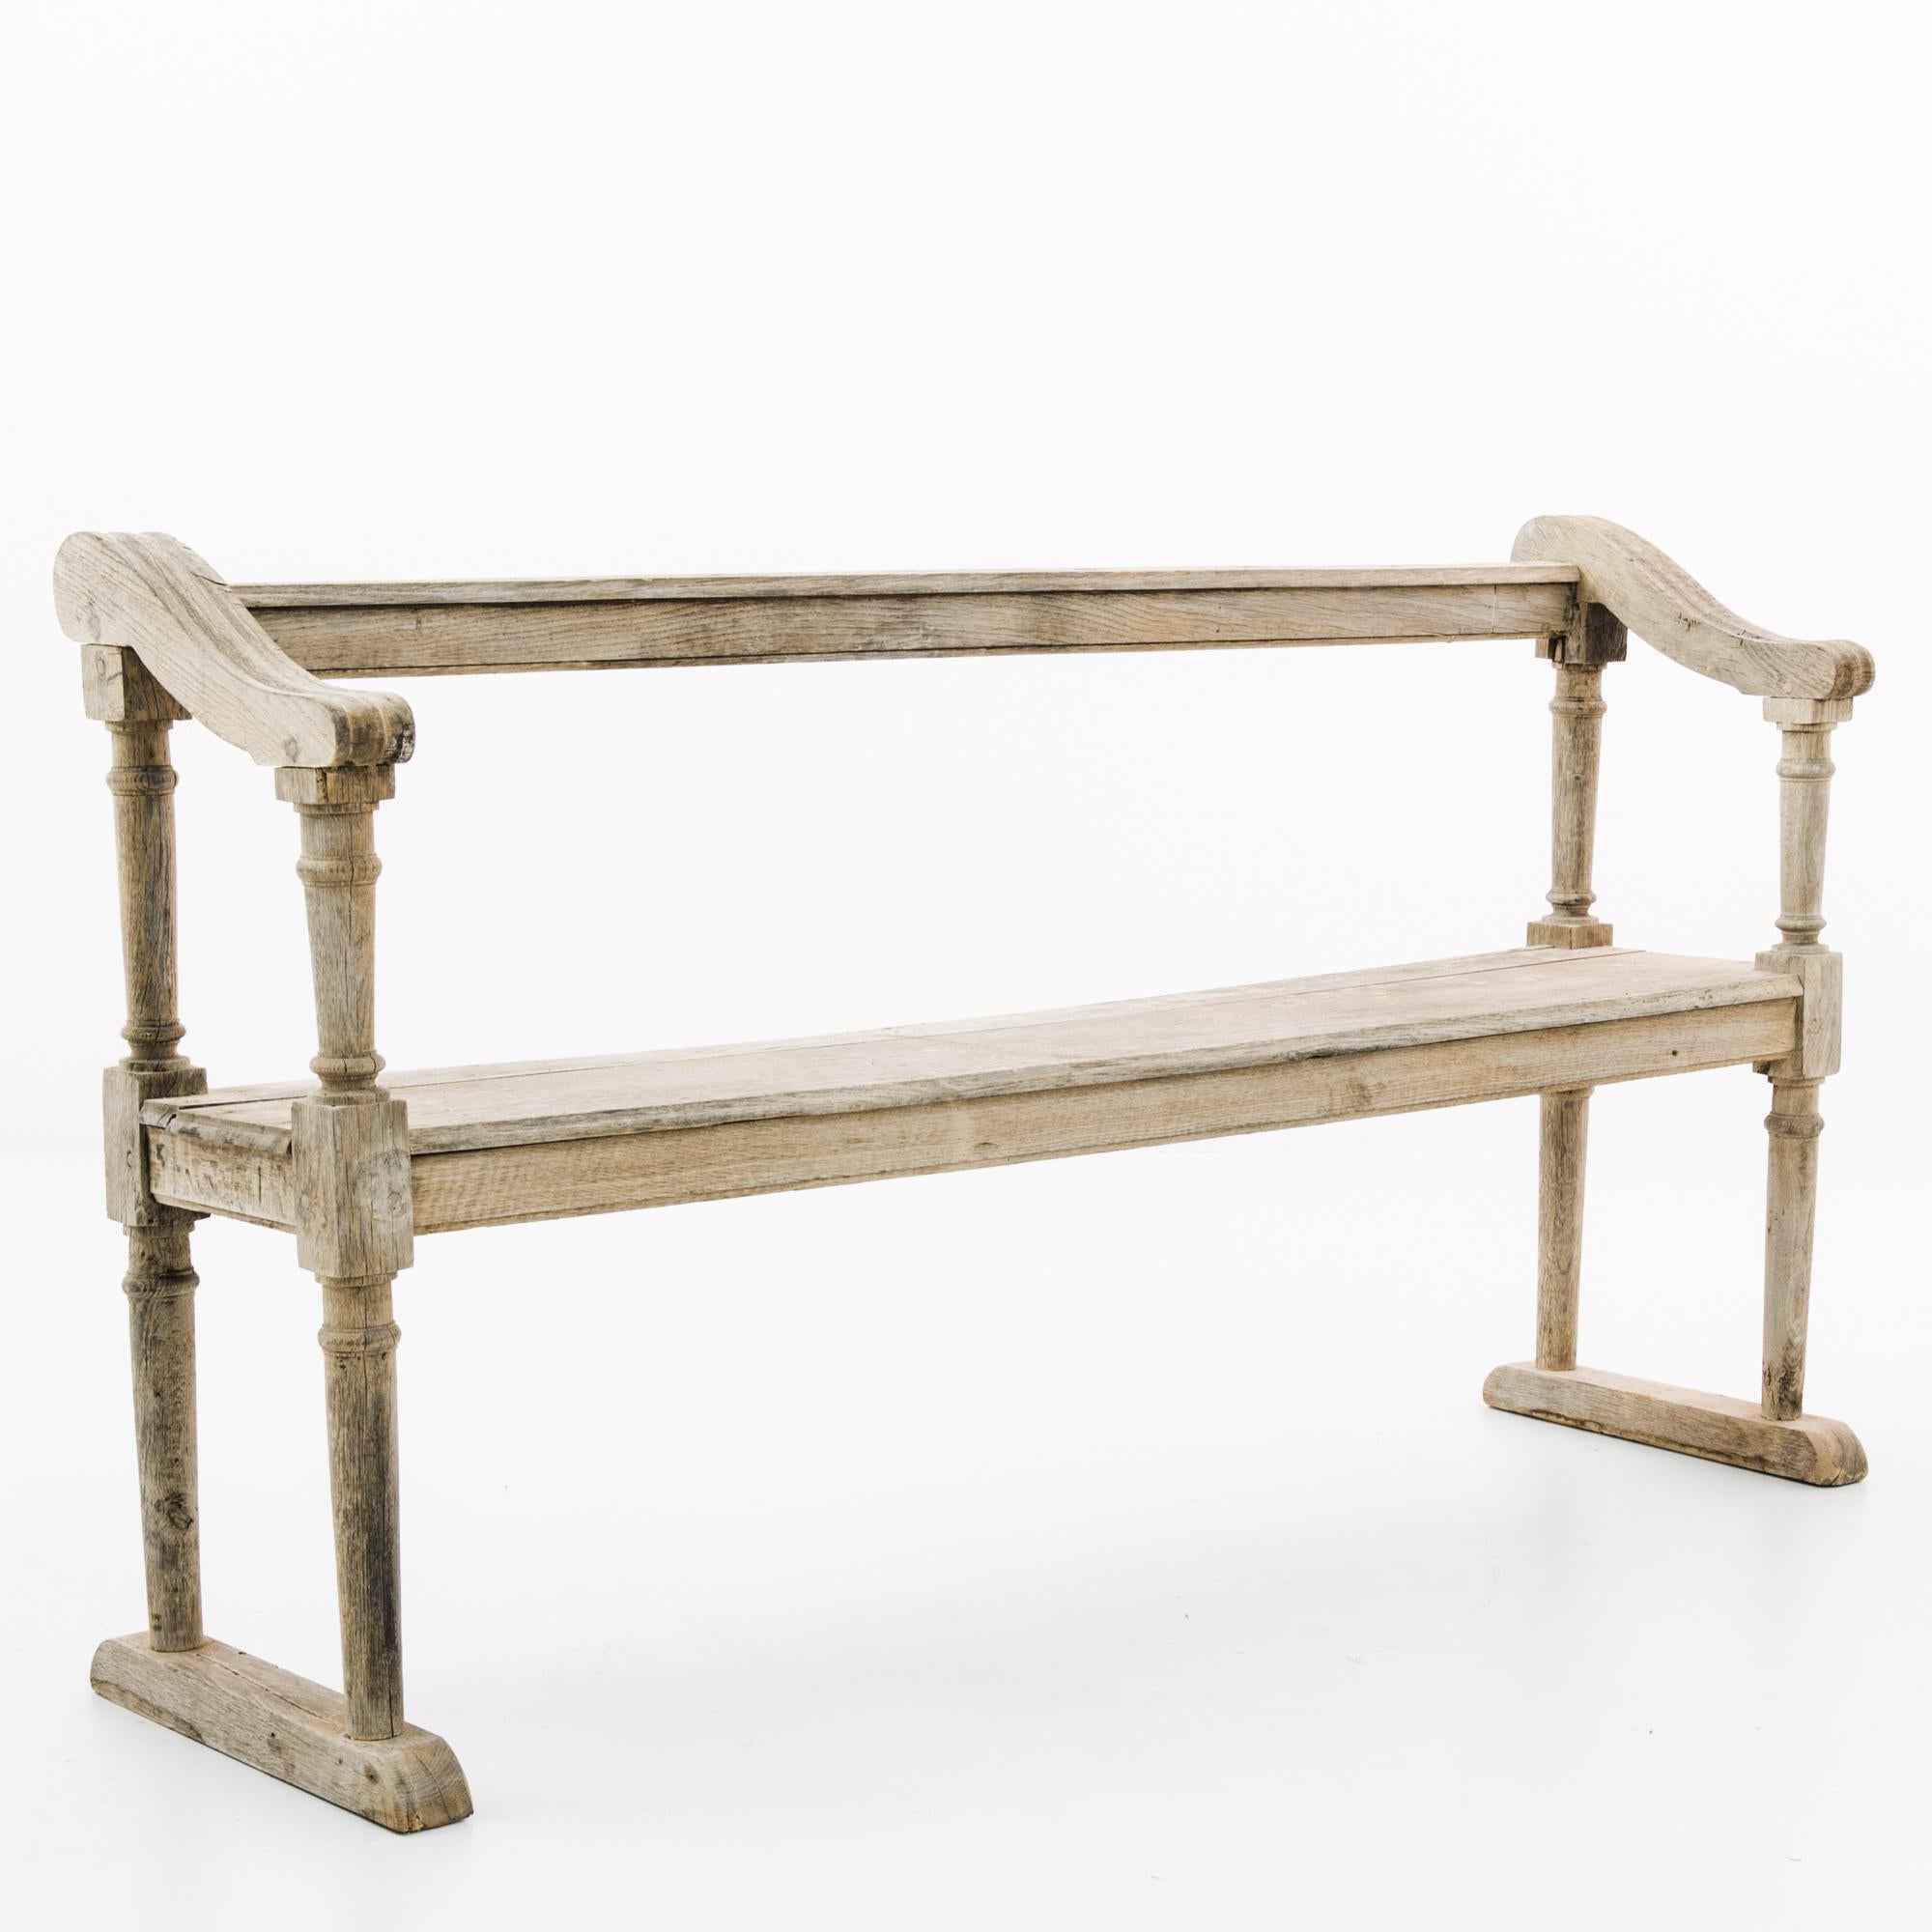 French Provincial 1880s French Bleached Oak Bench